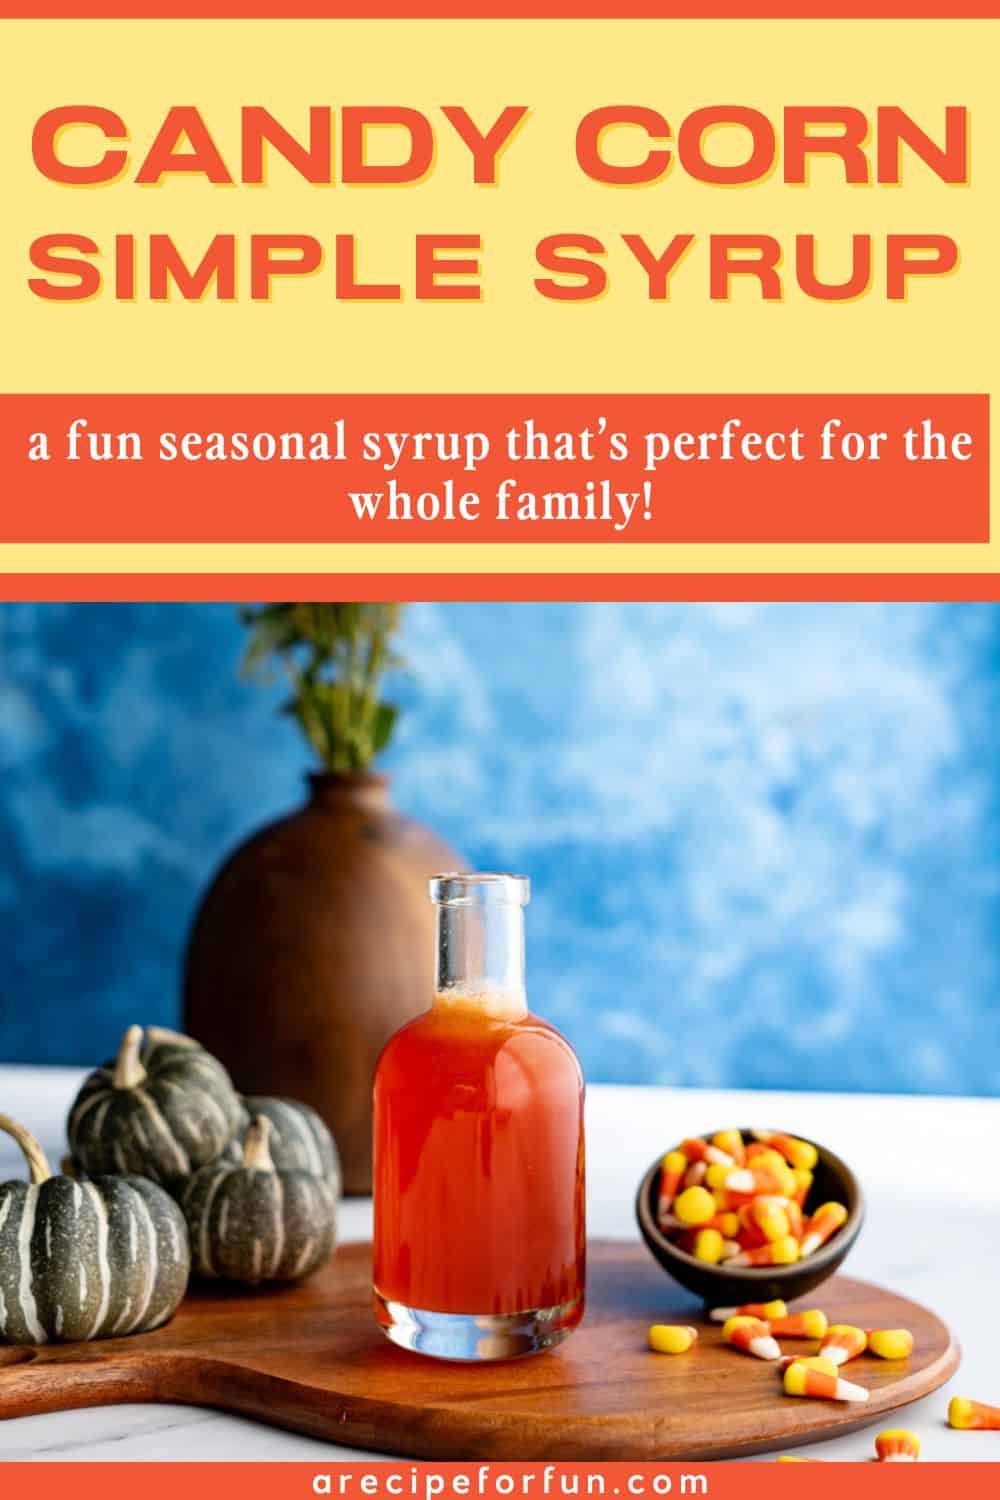 Pinterest Pin for candy corn simple syrup.